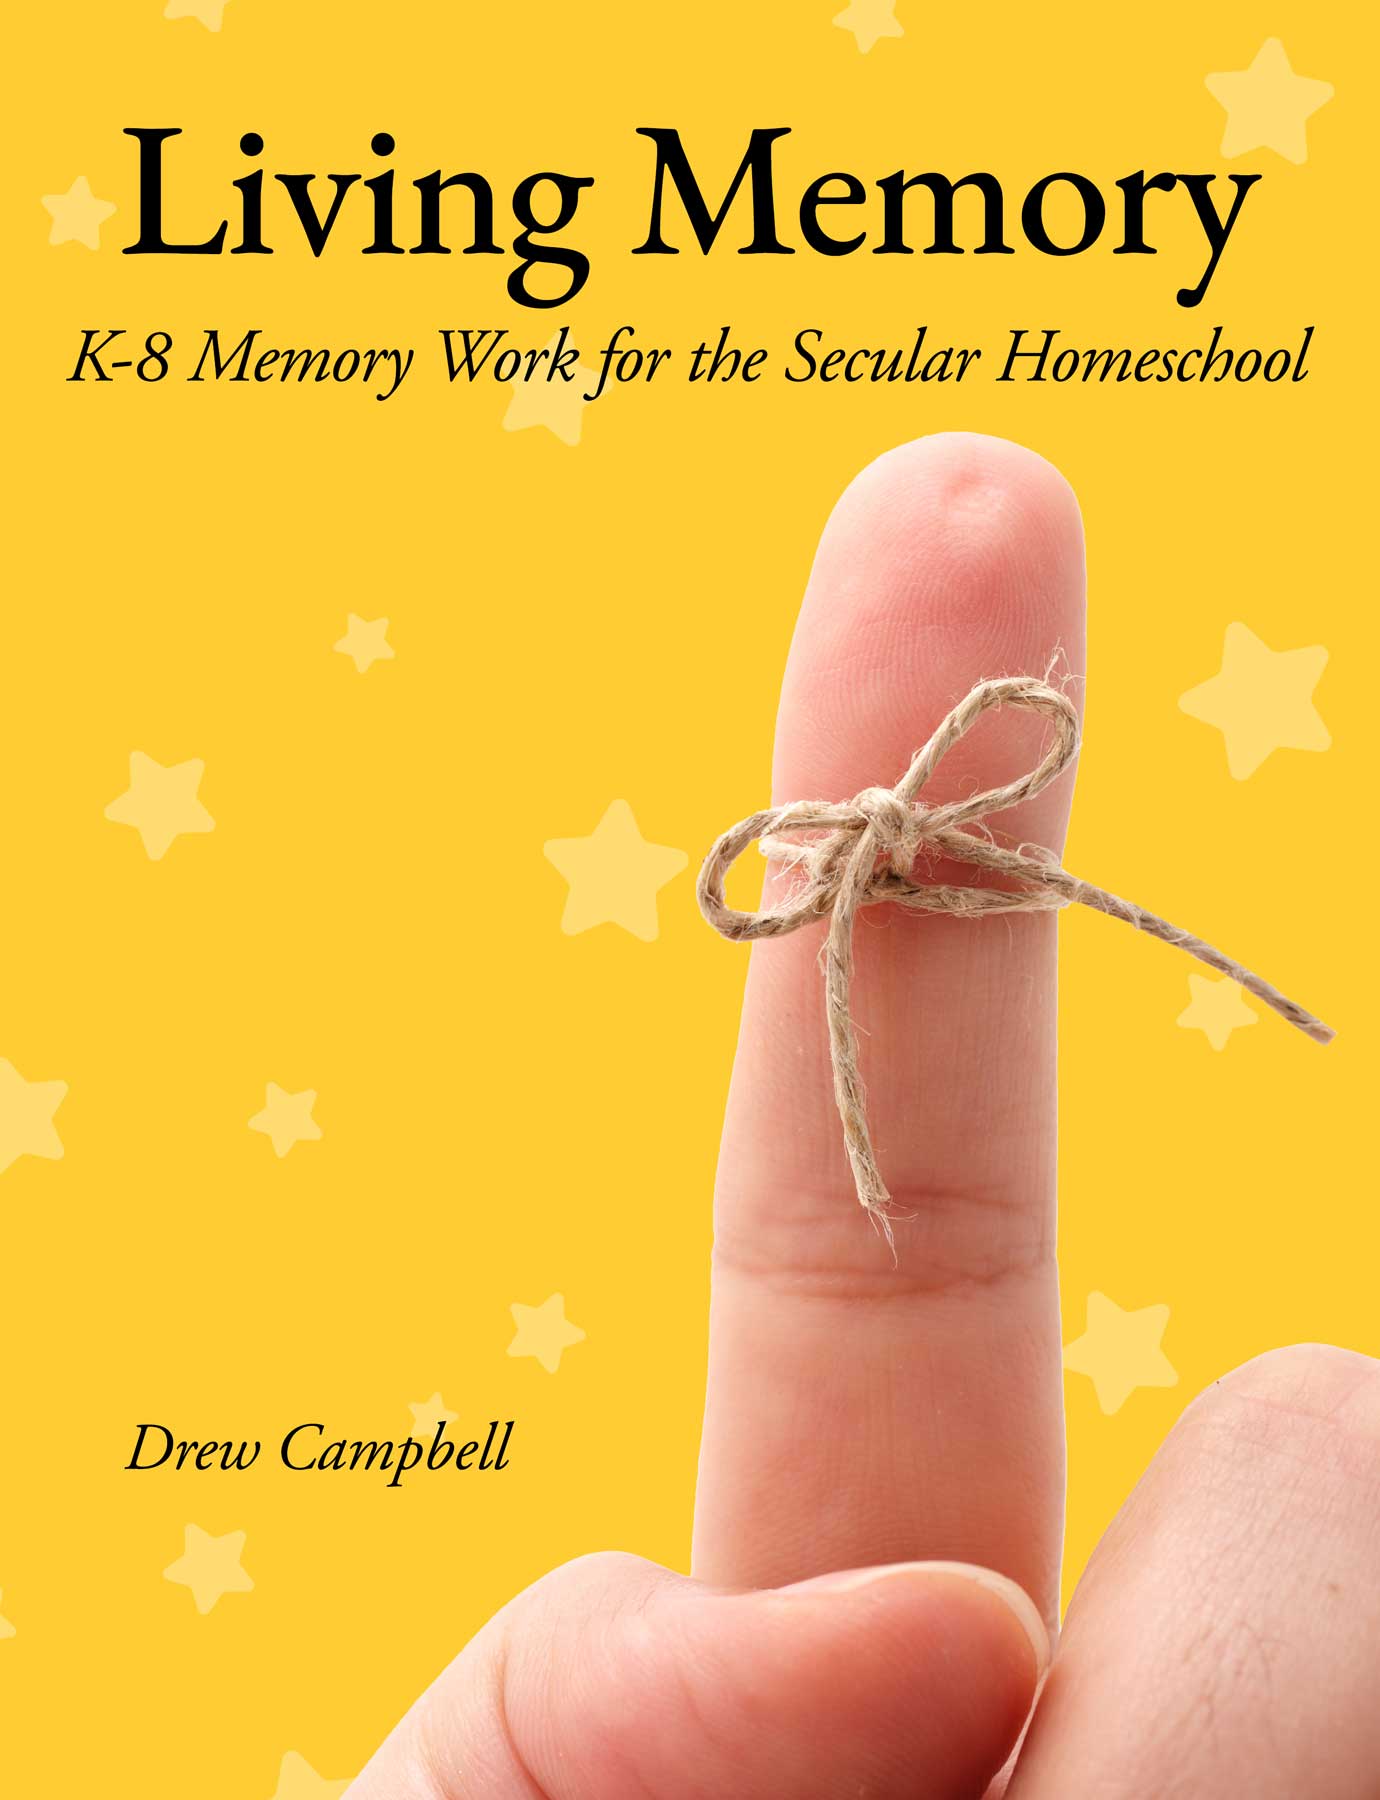 Living Memory: K-8 Memory Work for the Secular Homeschool by Drew Campbell